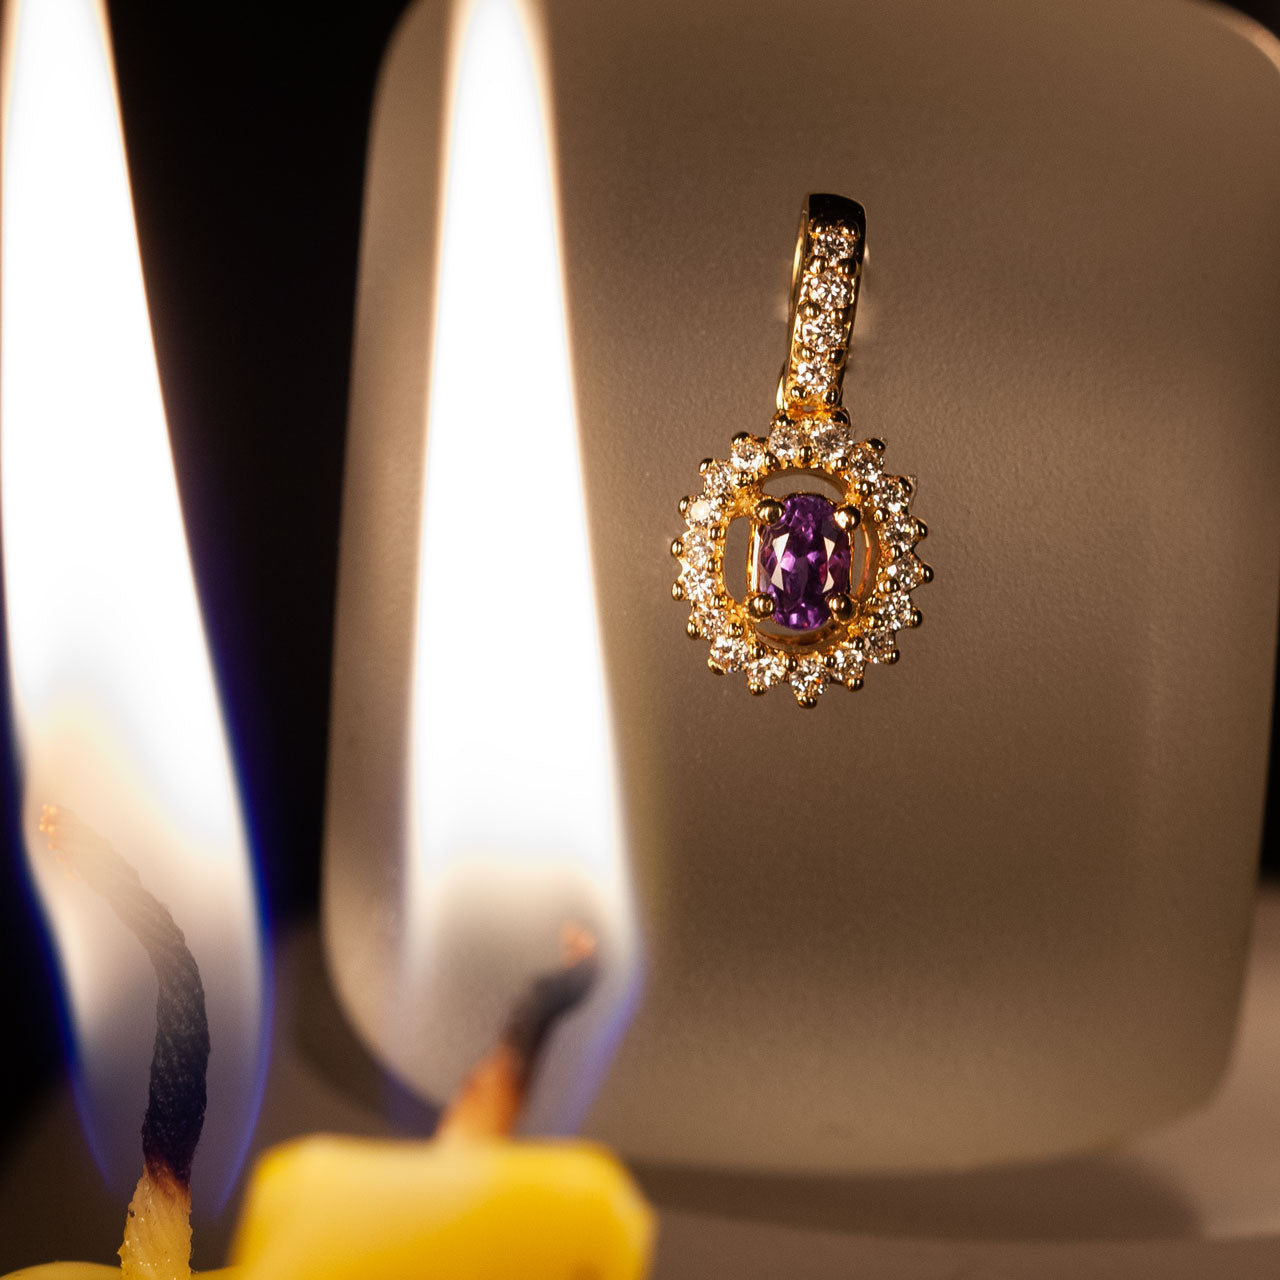 18k yellow gold pendant featuring a 0.23ct Alexandrite stone with candlelight in the background